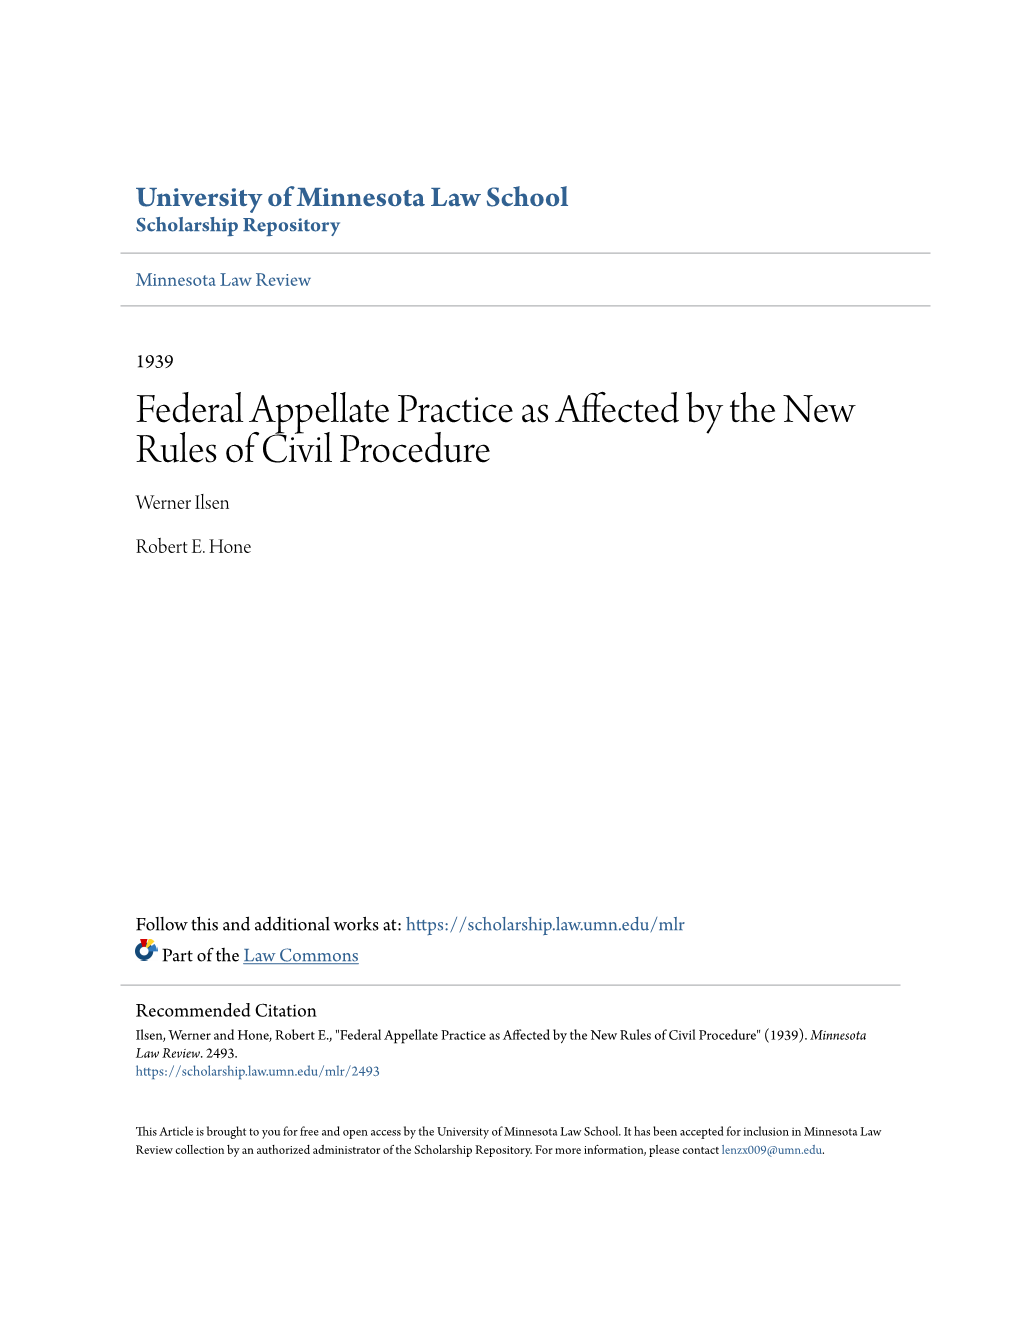 Federal Appellate Practice As Affected by the New Rules of Civil Procedure Werner Ilsen